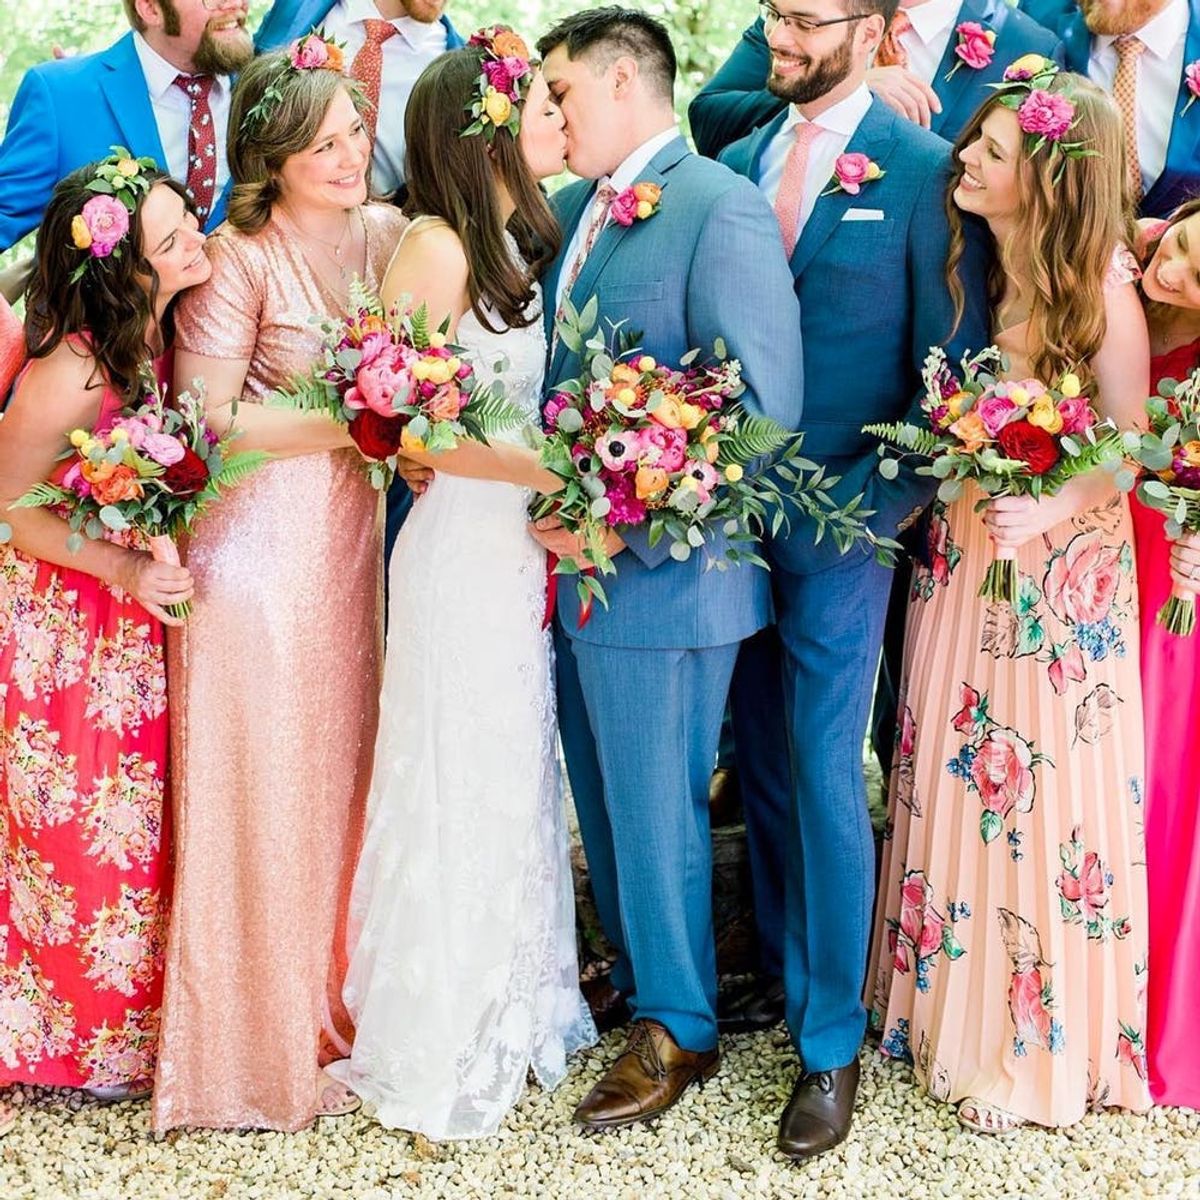 12 of the Most Swoon-Inducing Mismatched Bridesmaid Dress Looks on Insta